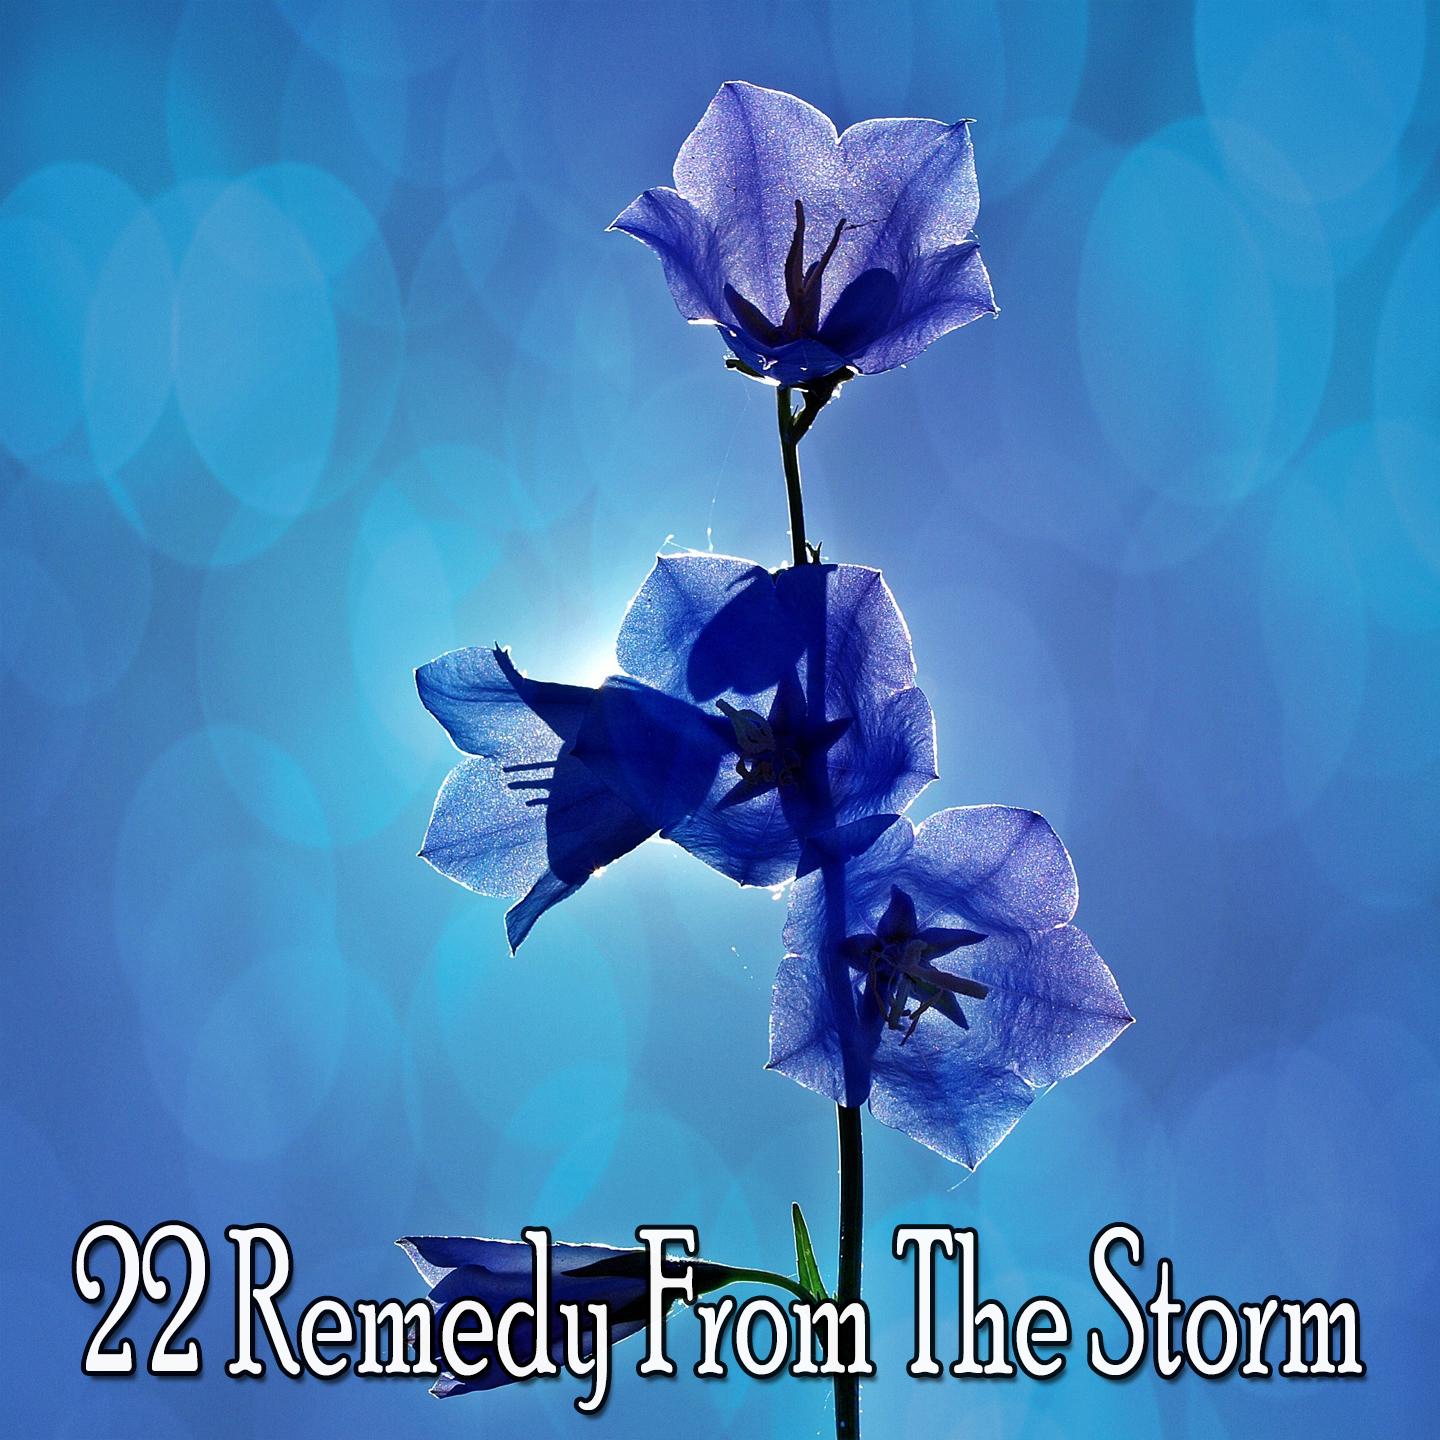 22 Remedy from the Storm